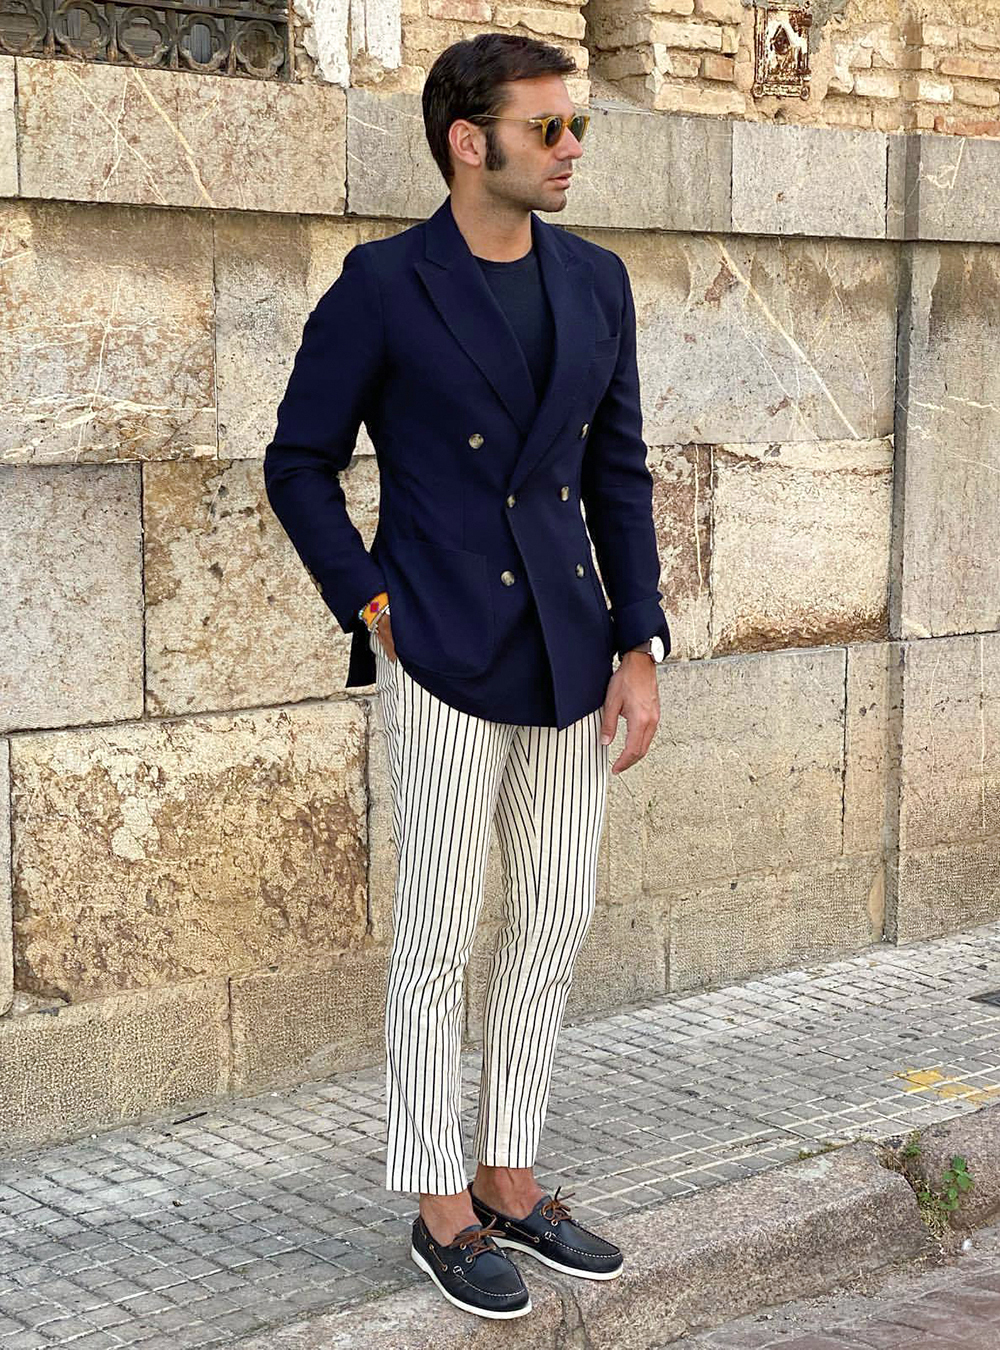 striped white chinos and double-breasted navy blazer